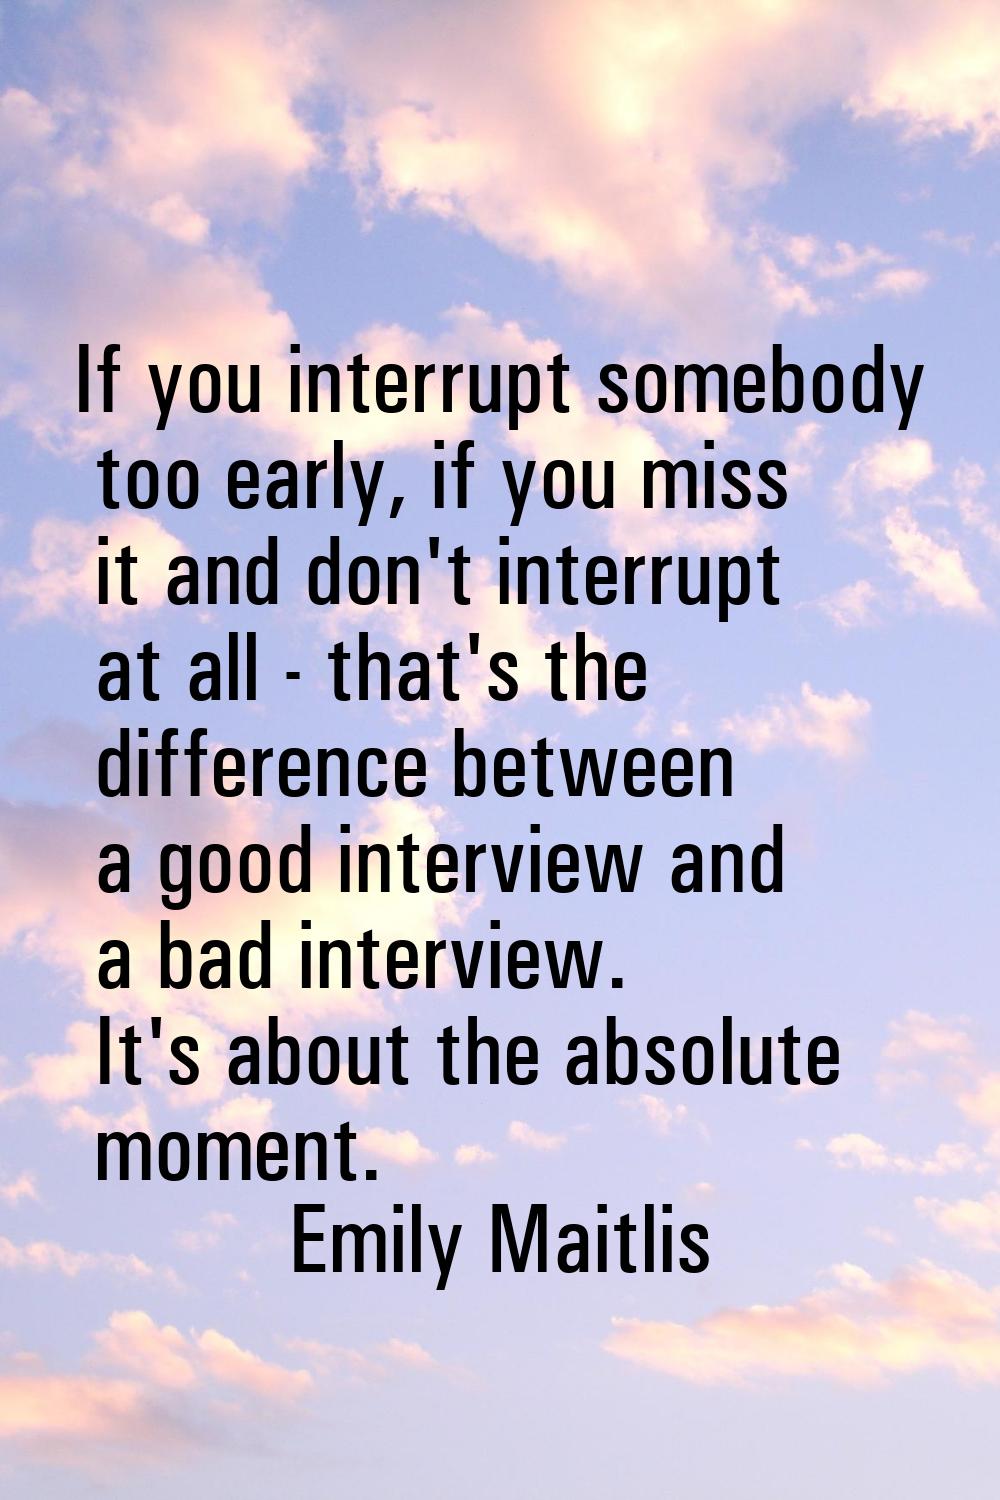 If you interrupt somebody too early, if you miss it and don't interrupt at all - that's the differe